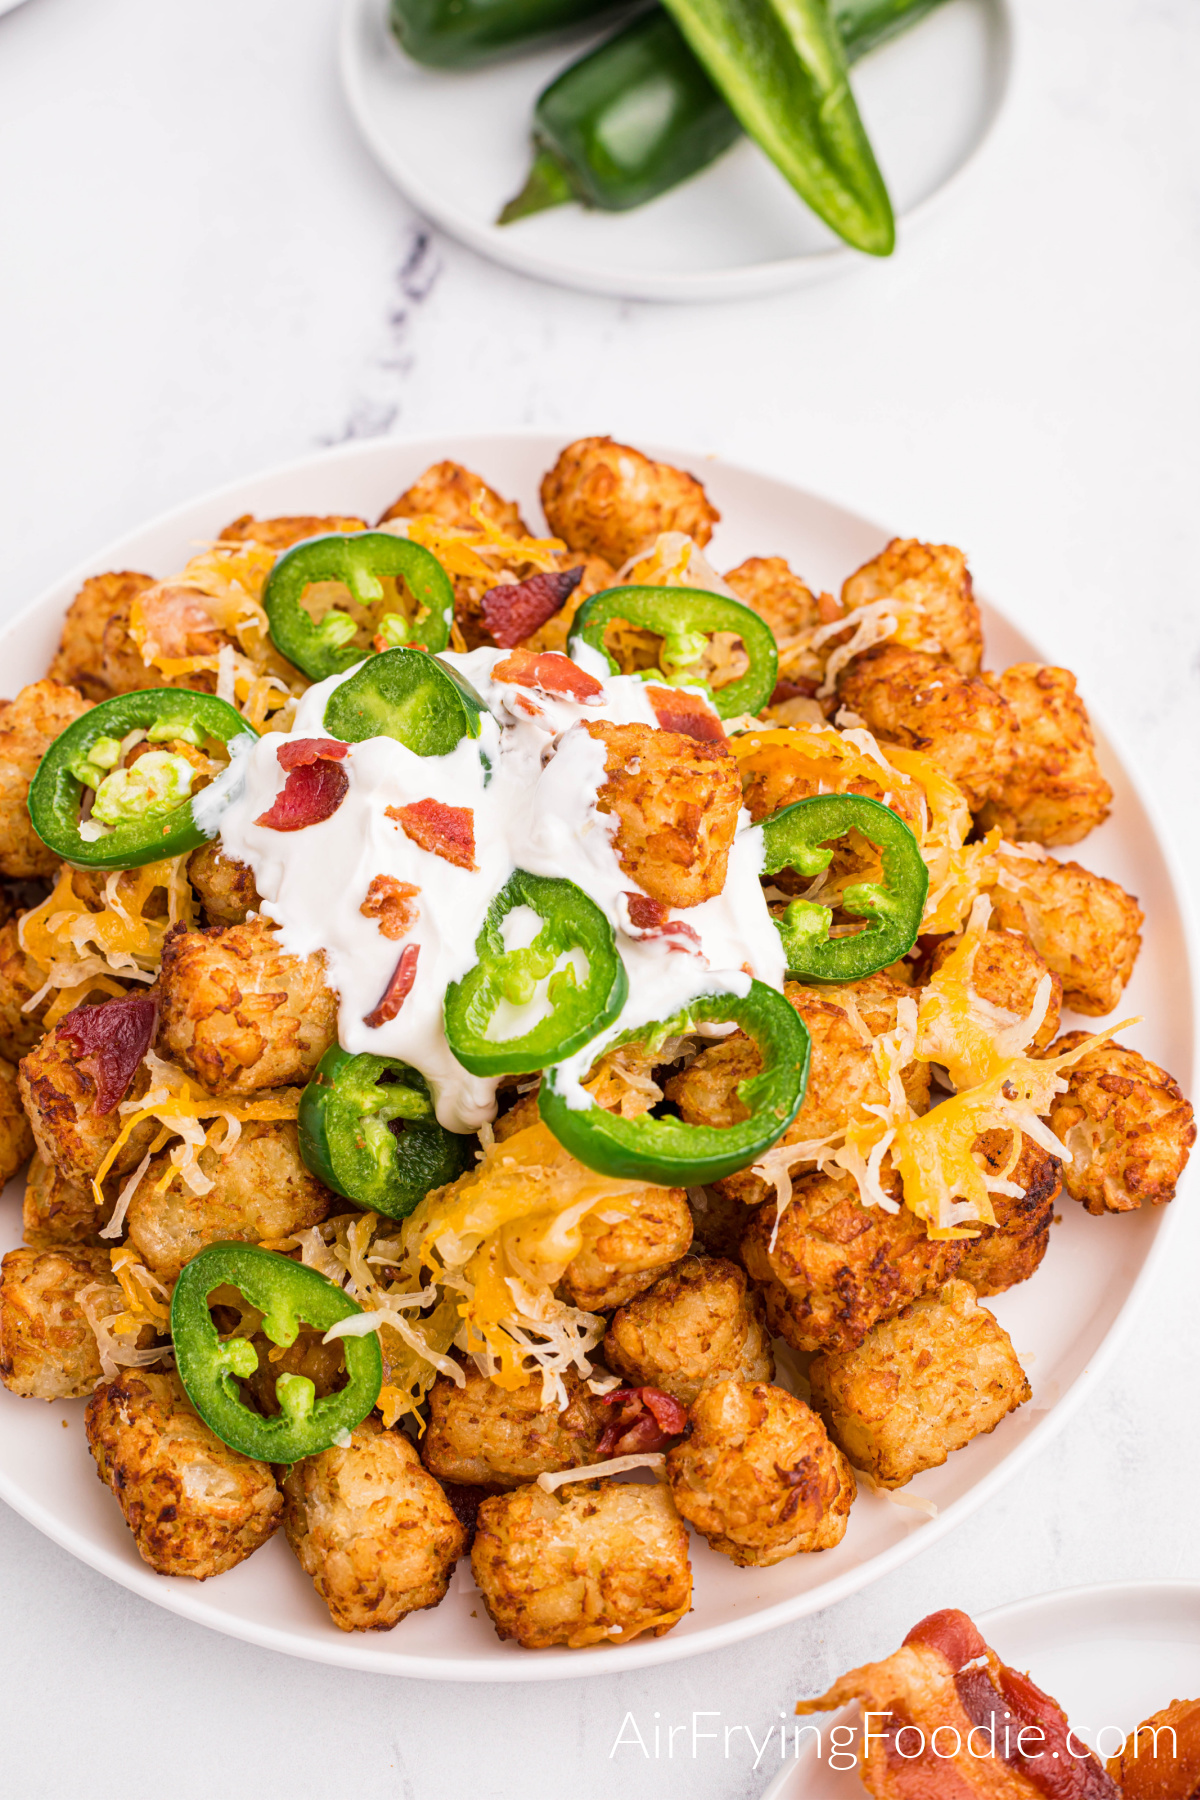 Loaded Tater Tots in a hot plate, ready to eat.